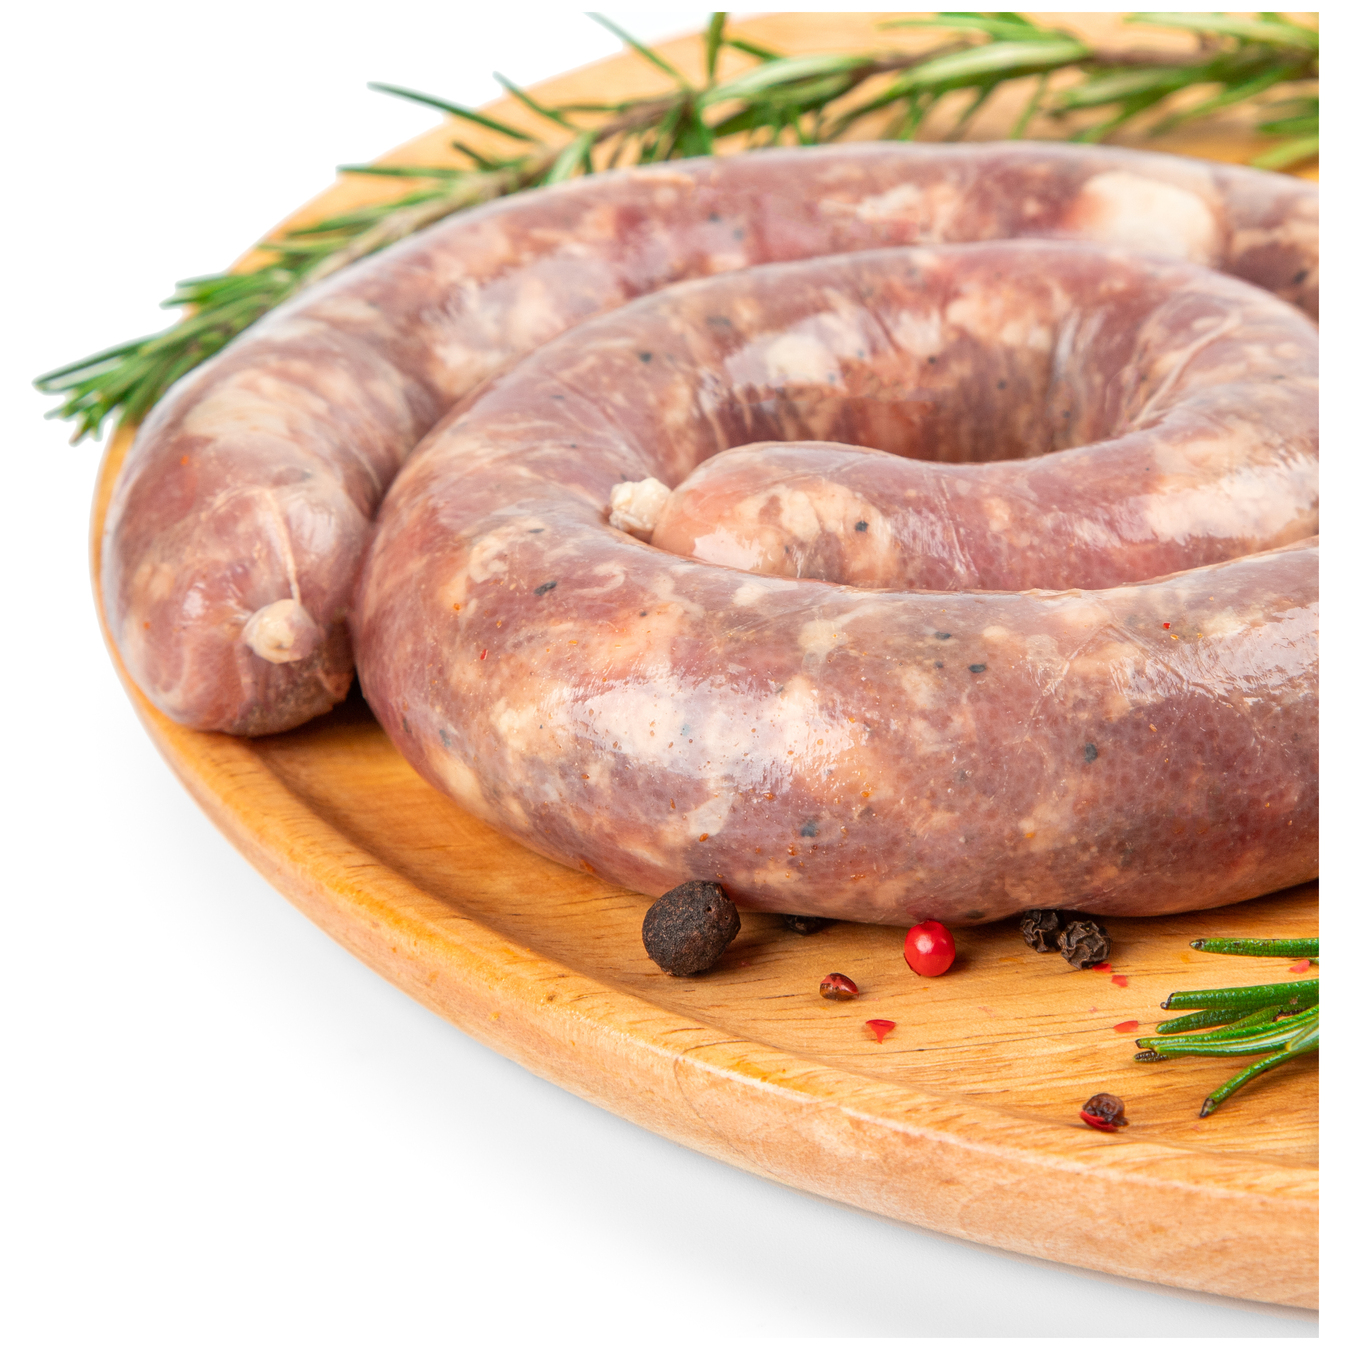 Grilled veal sausages